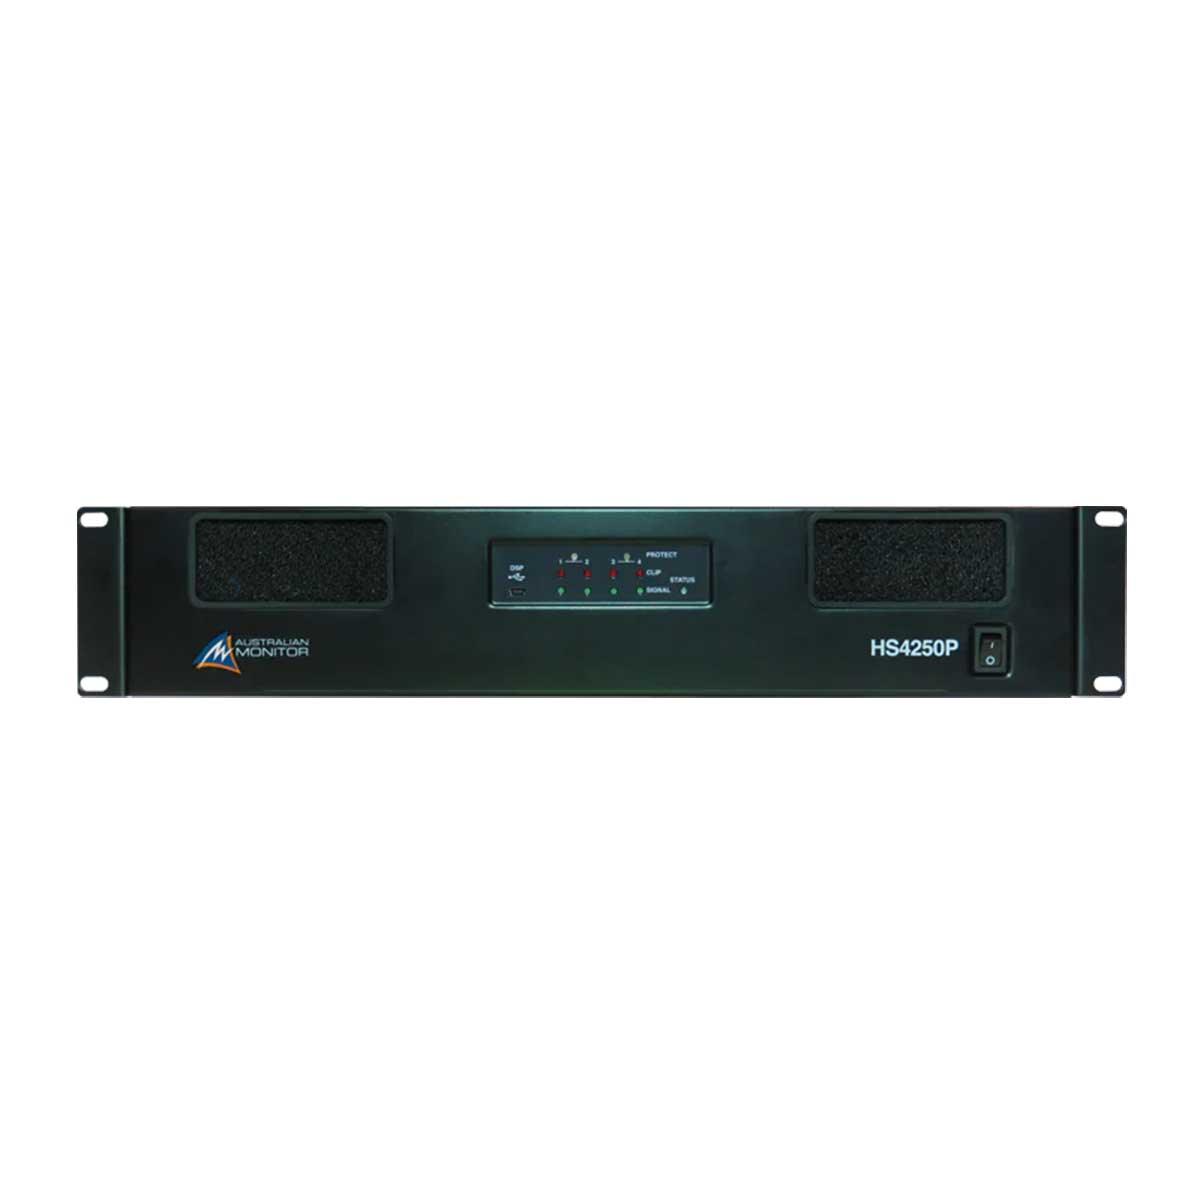 Australian Monitor HS4120P  4 x 120 watt Power Amplifier with DSP and RS232 